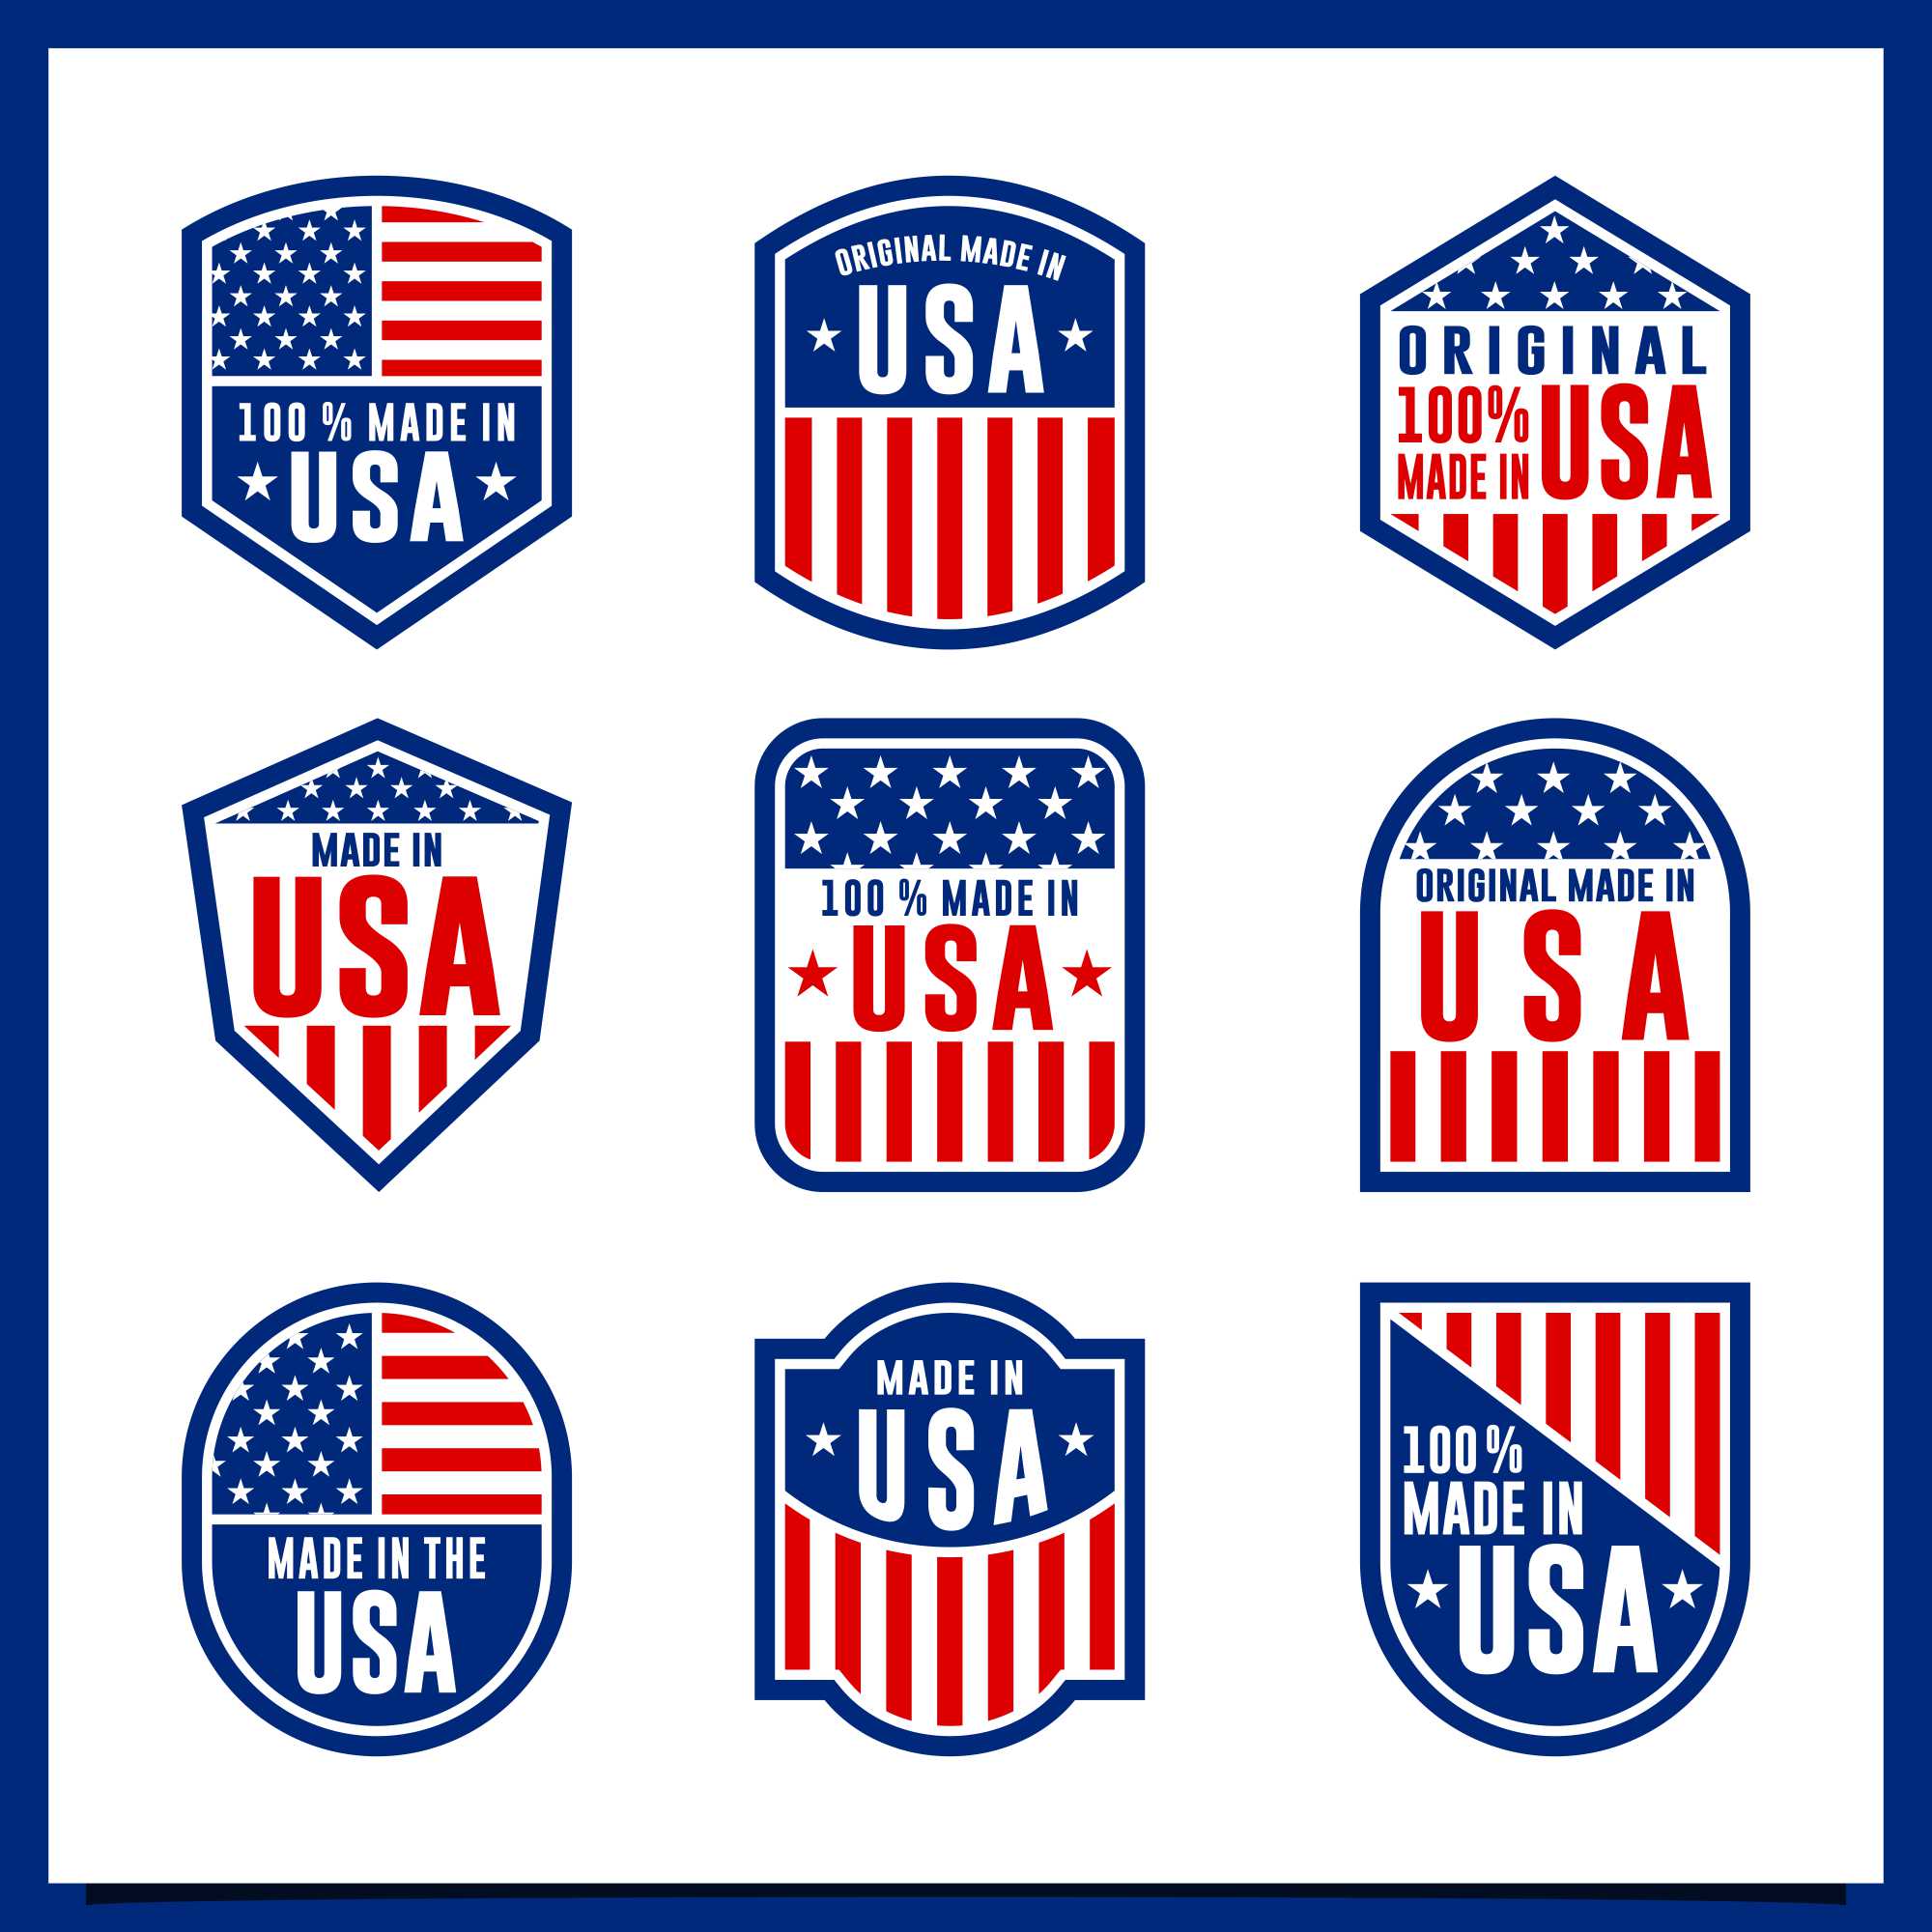 Made in USA label product design collection - $6 cover image.